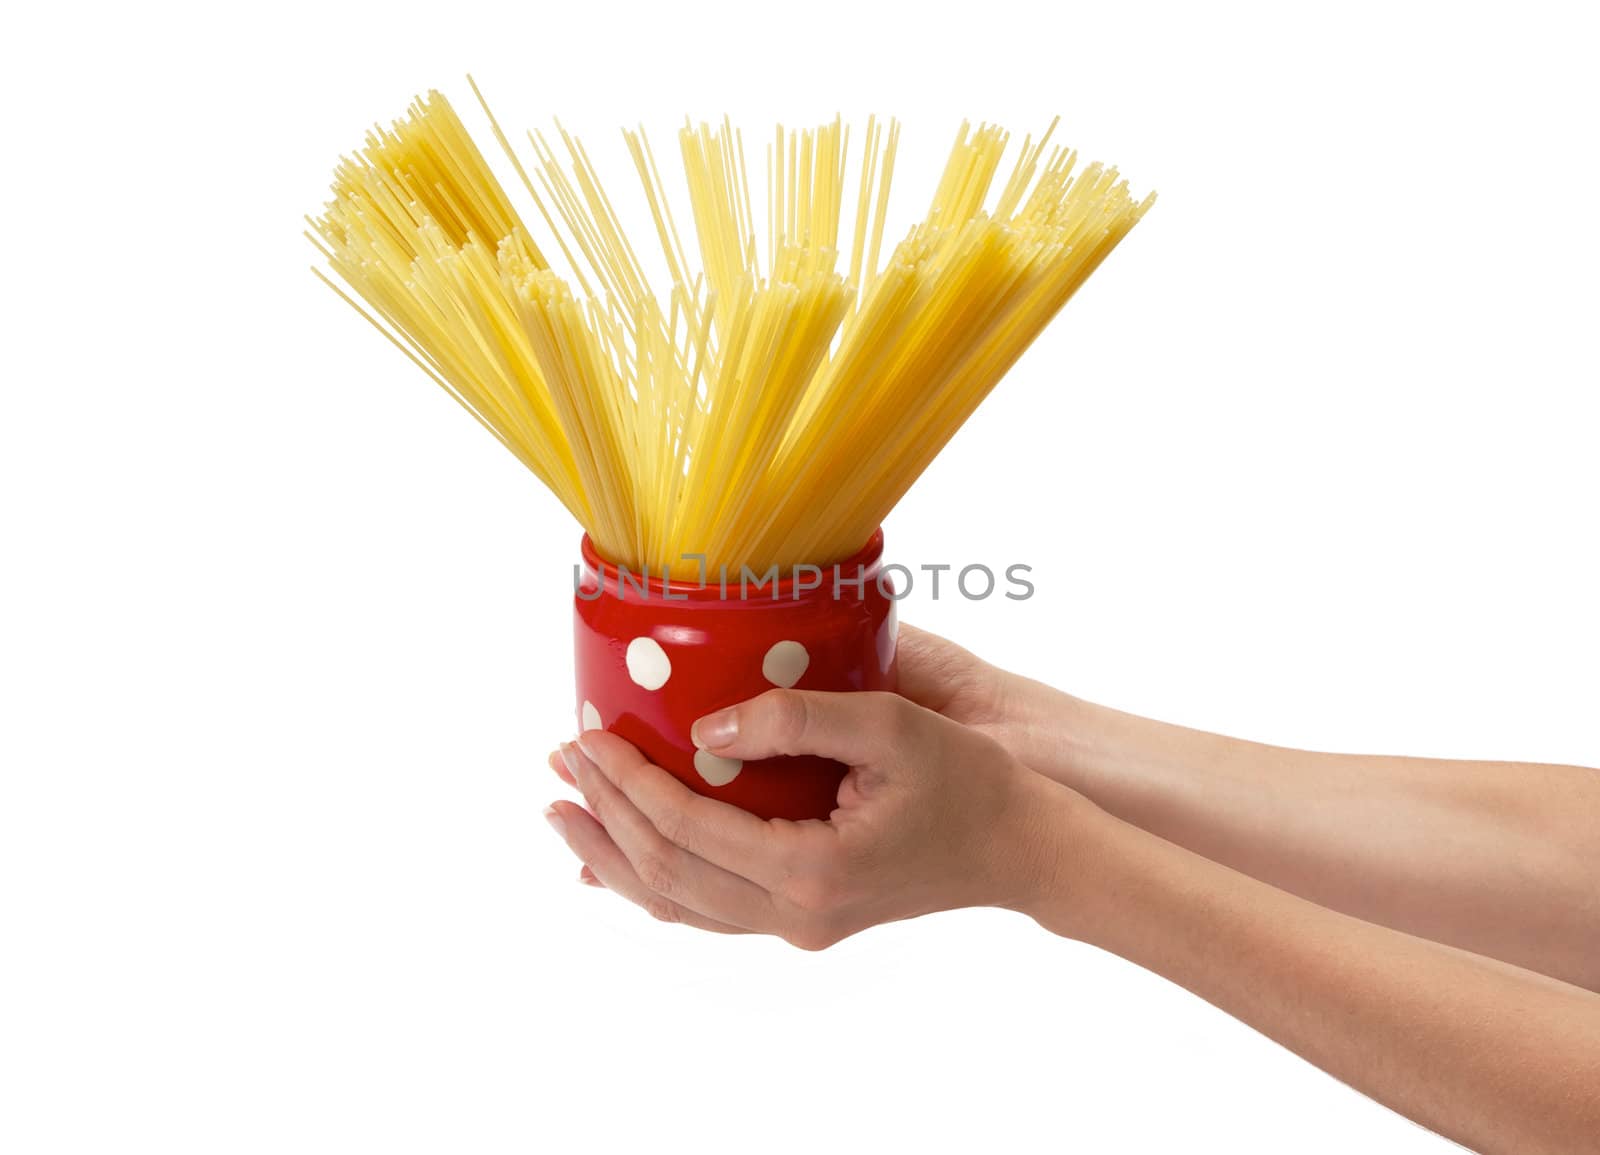 Woman's hands holding red jar full of spaghetti inside.  Isolated on a white background.